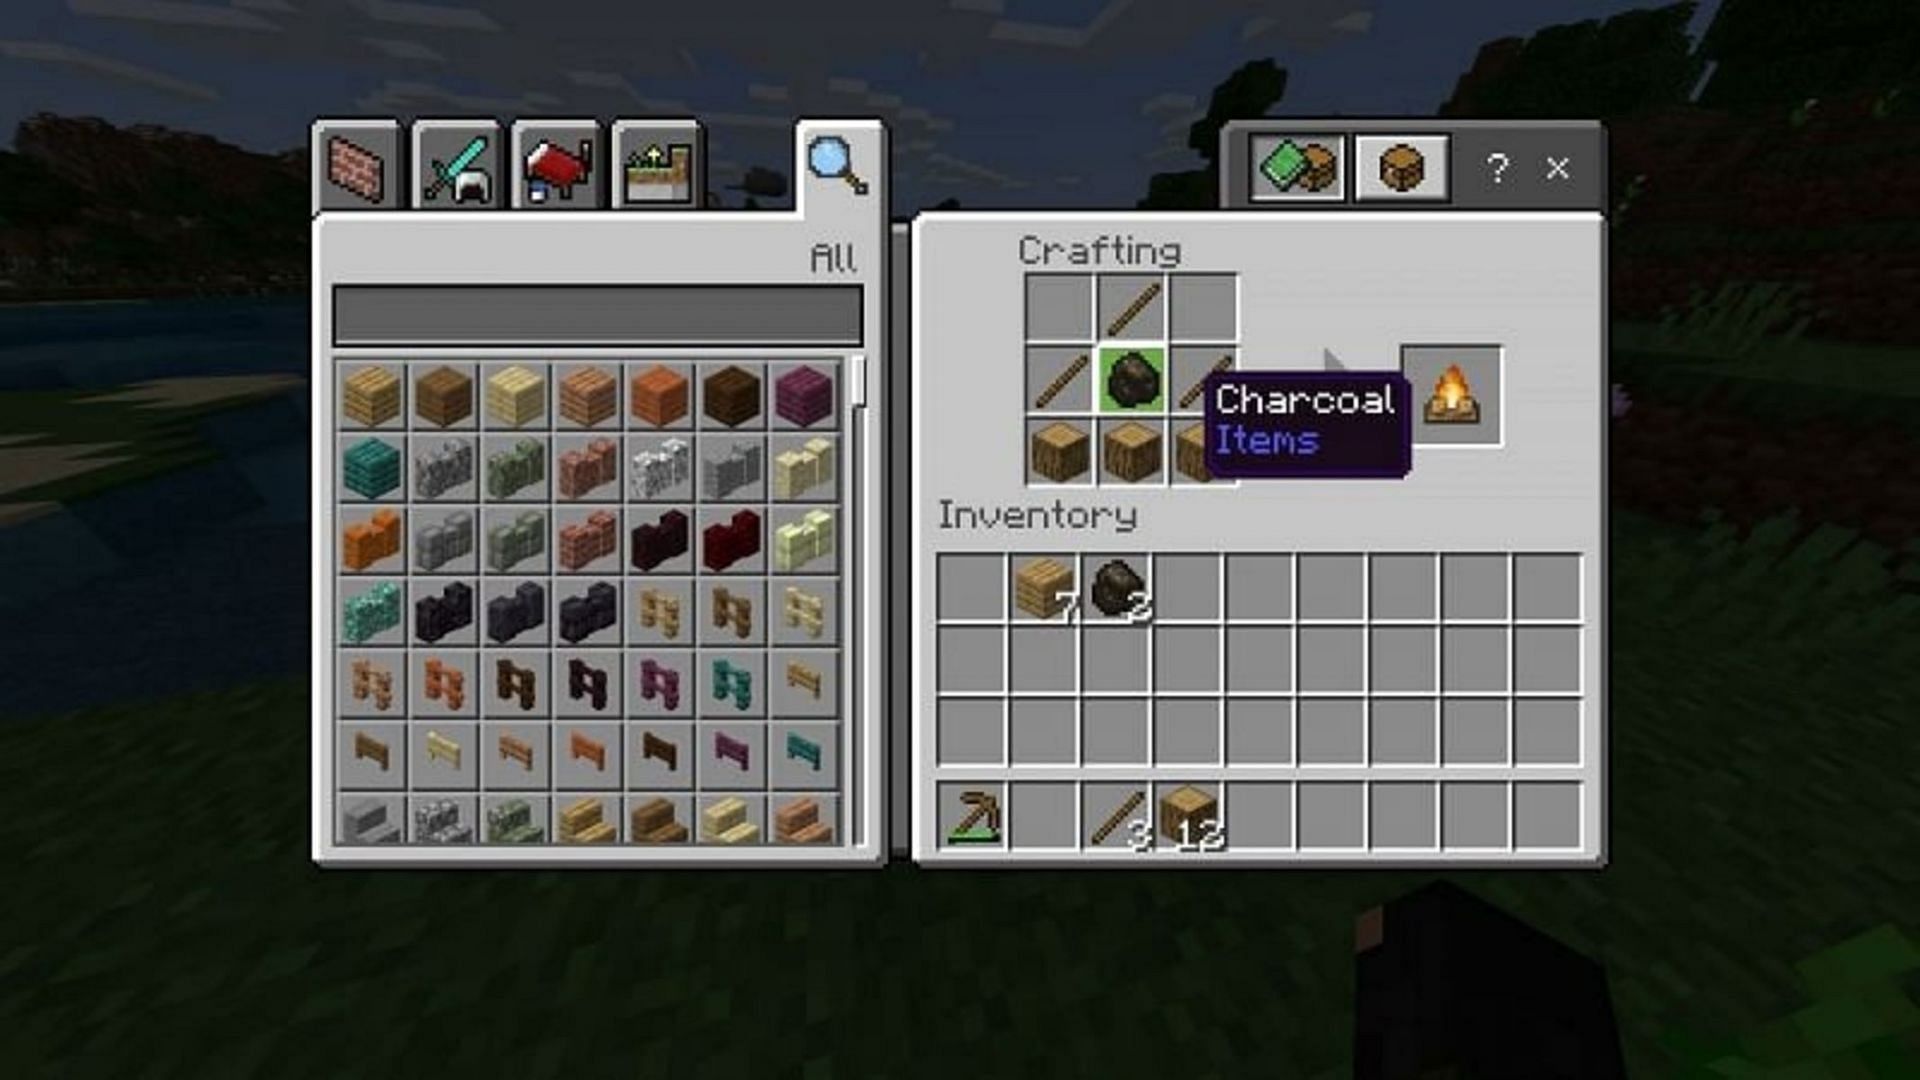 Charcoal can be used in a campfire recipe (Image via Mojang)